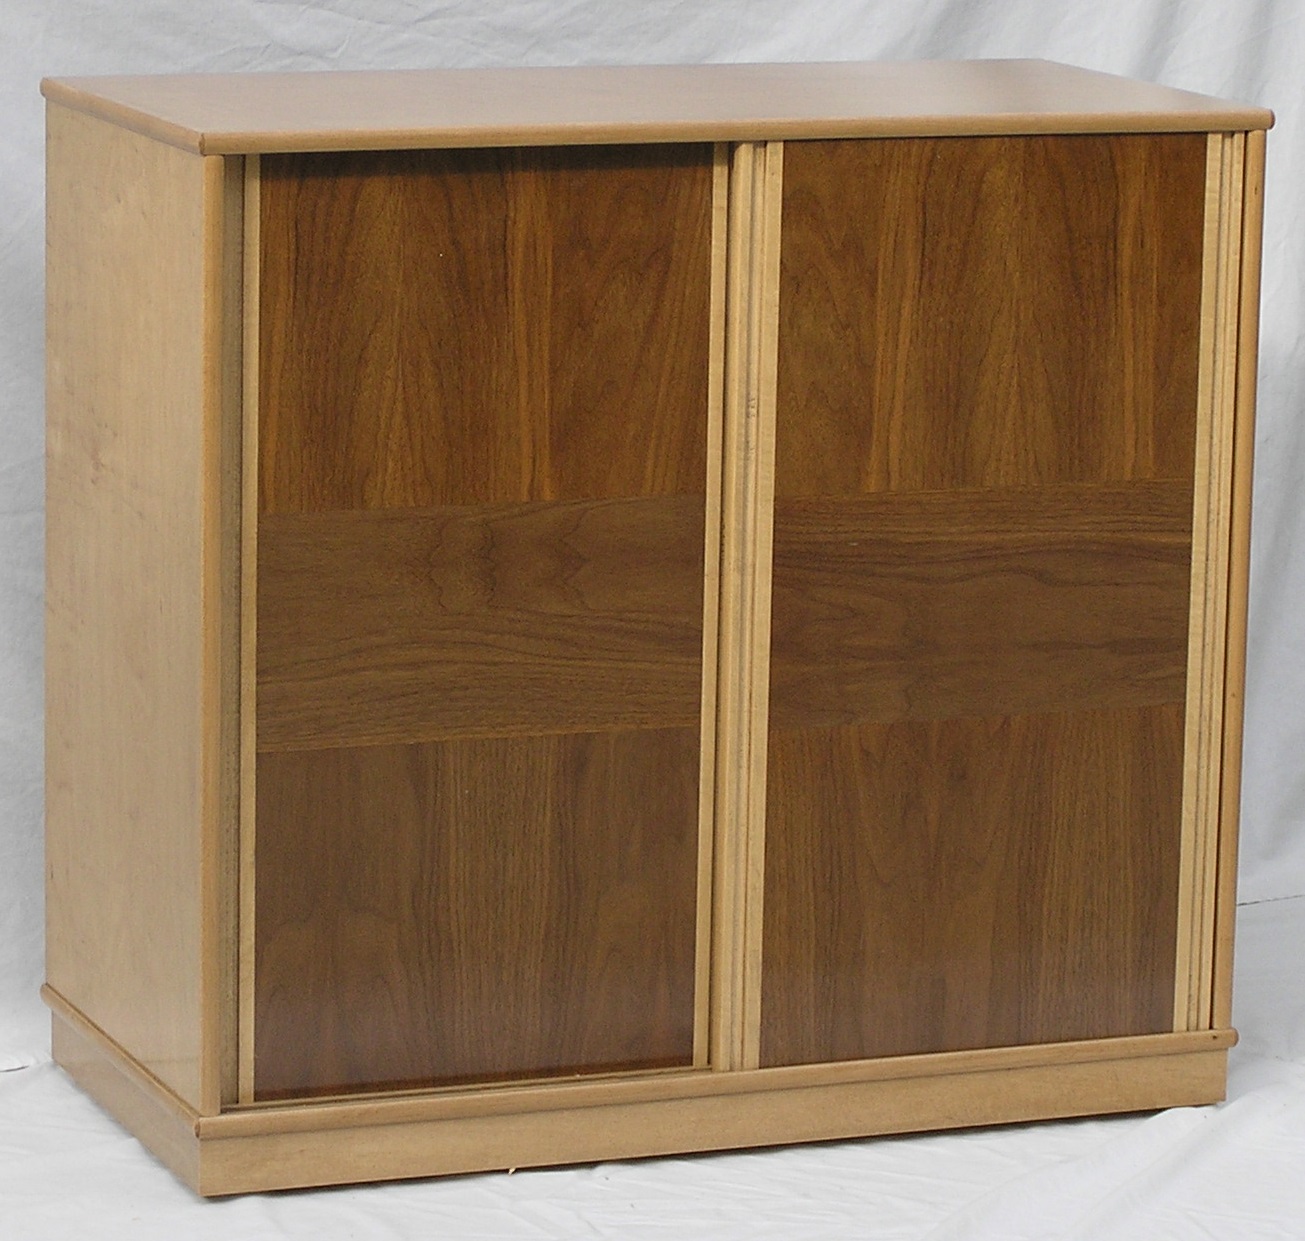 35" high LP cabinet with cross banded walnut sliding doors finished in General Finishes antique maple. Quite the quality piece!